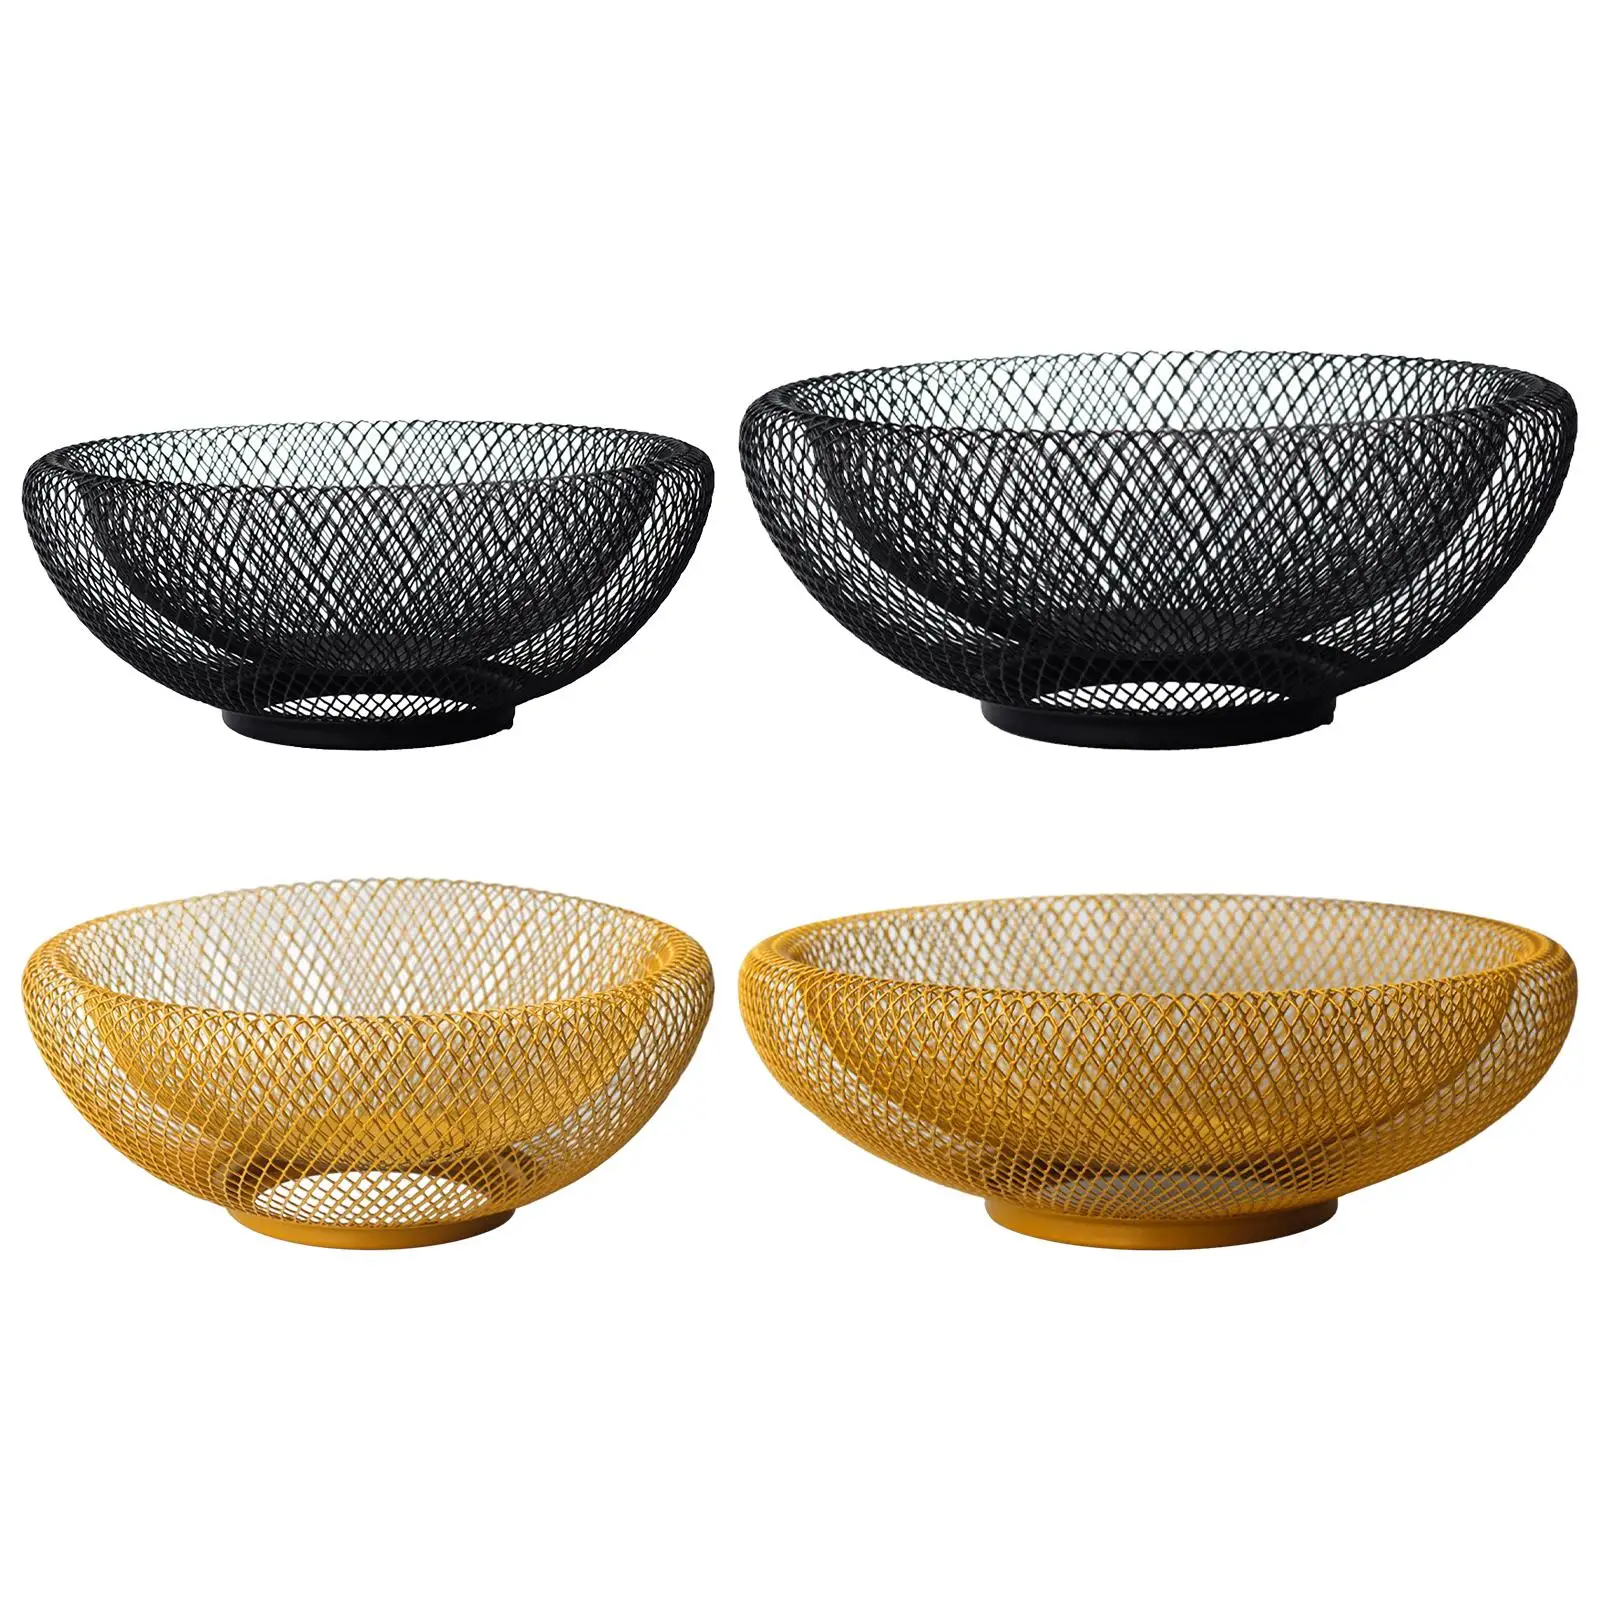 Nordic Wire Iron Fruit Basket Snack Storage Bowl Table Organizer Vegetable Stand Holder for Kitchen Ceremony Home Ornaments